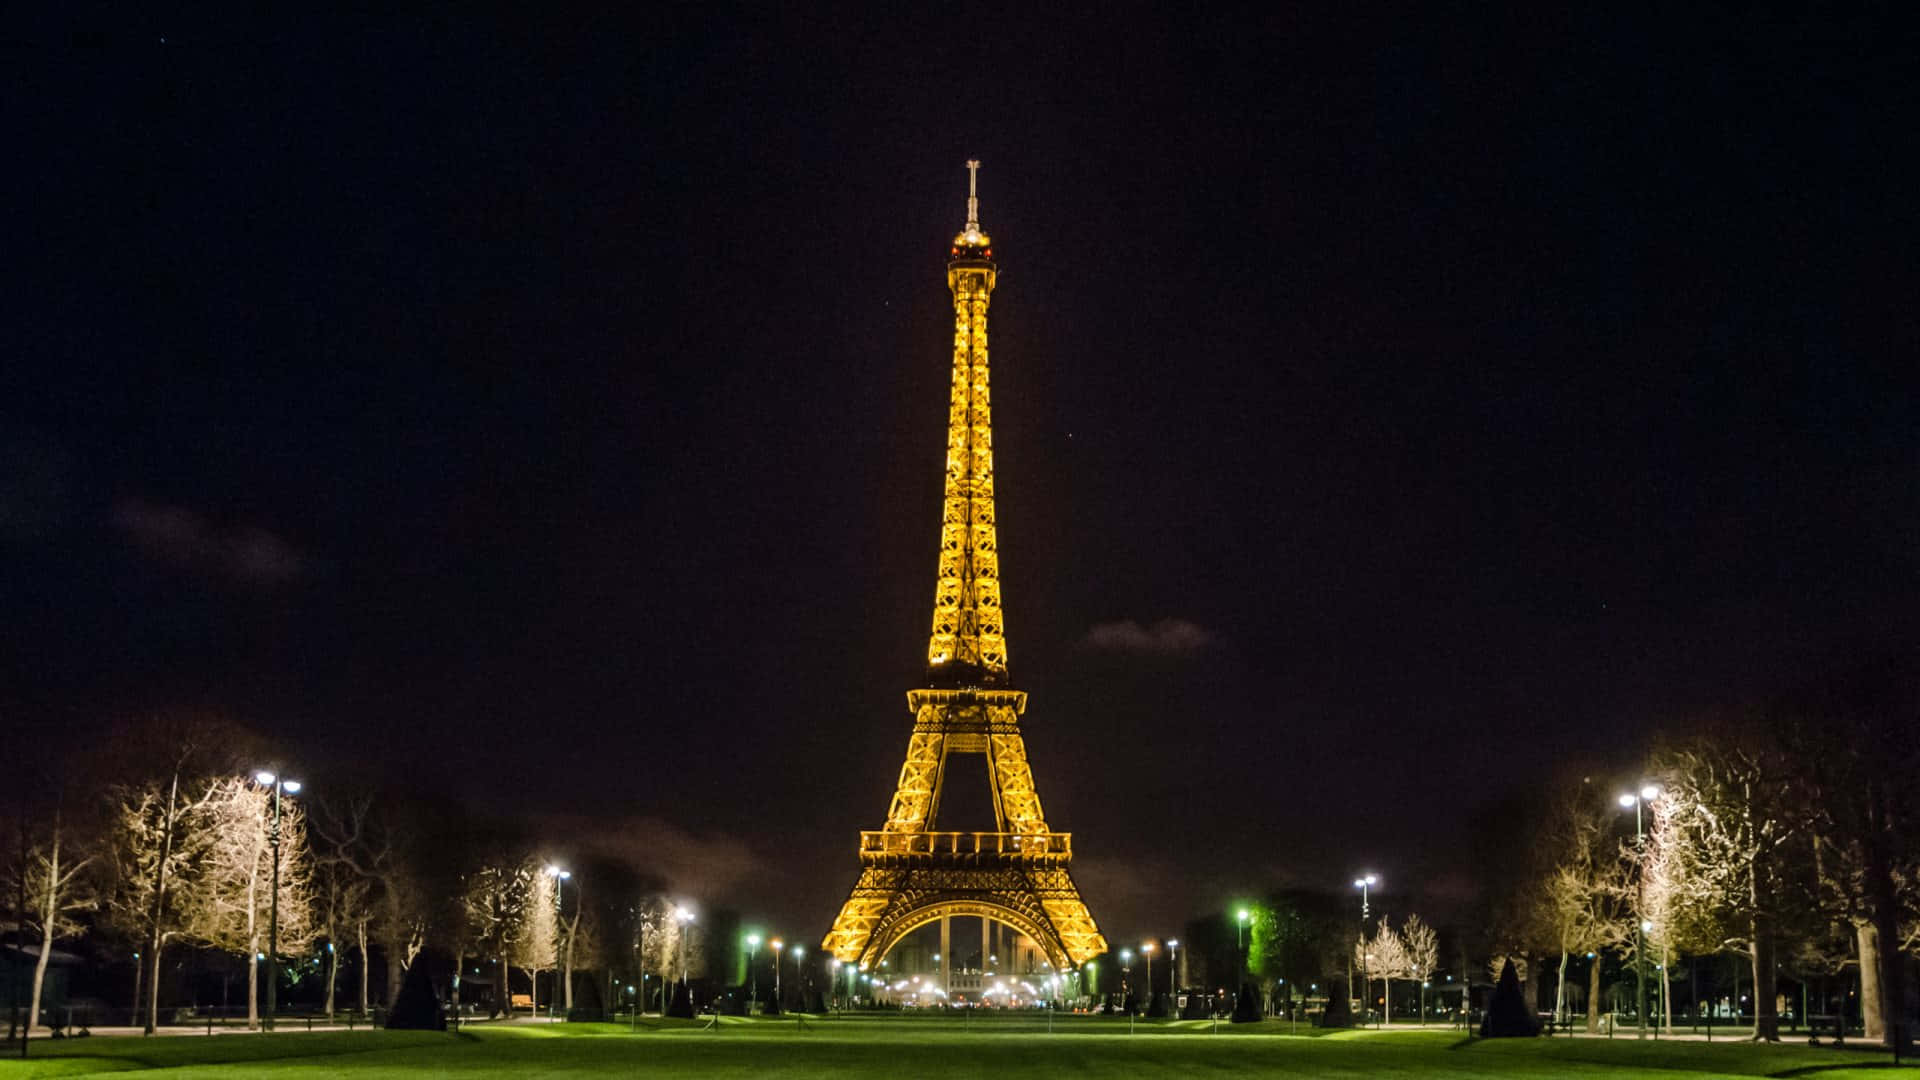 The majestic Eiffel Tower illuminated at night in Paris, France.